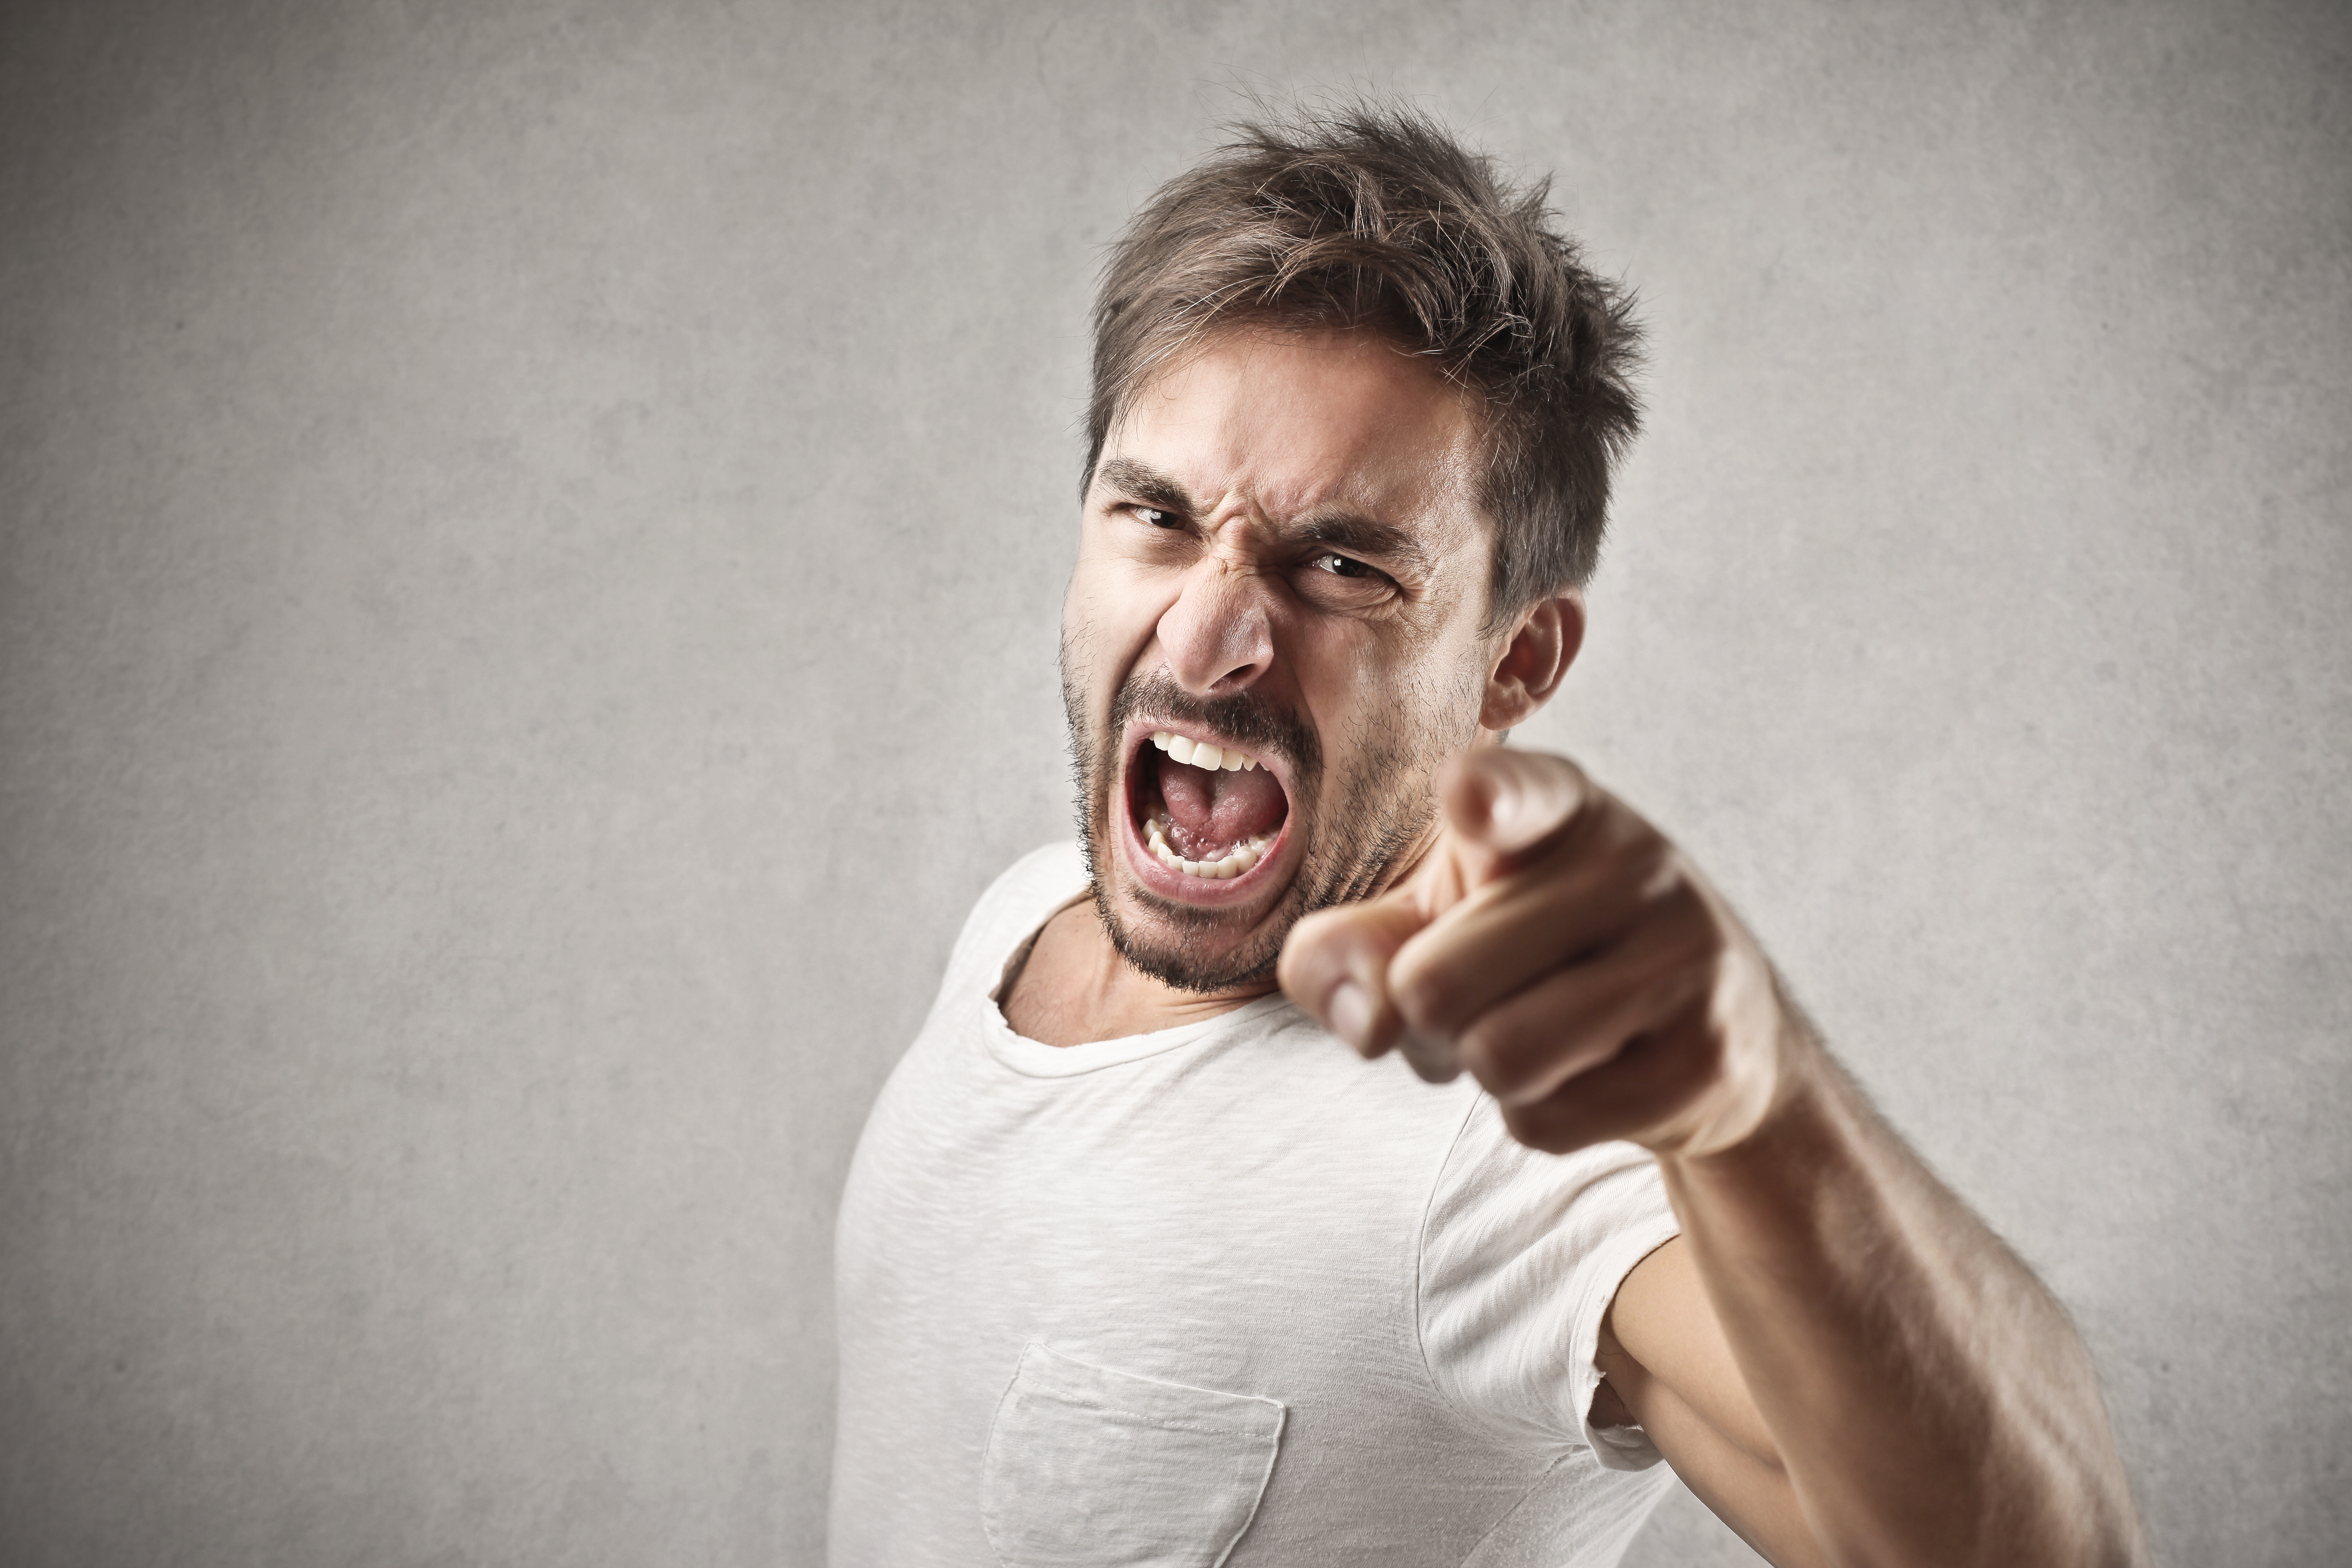 Portrait of a angry young man. | Source: Shutterstock